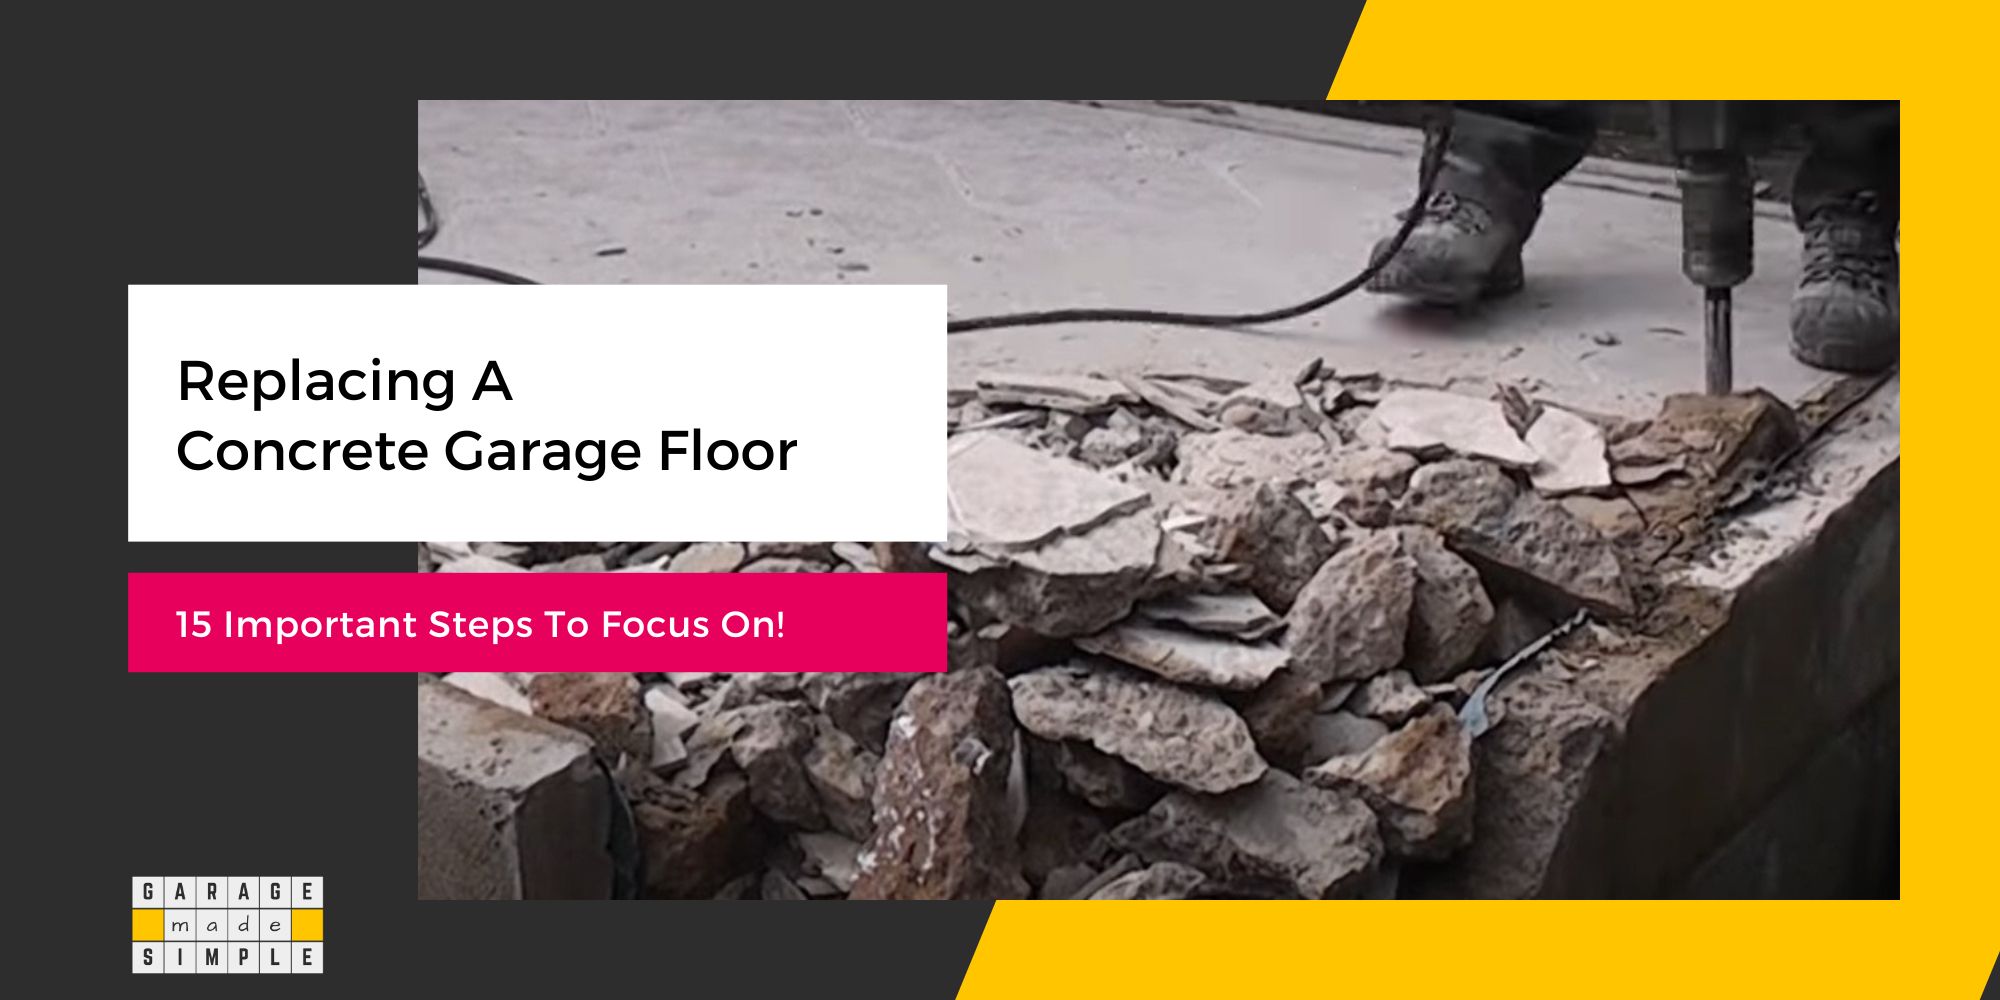 Replacing A Concrete Garage Floor: 15 Important Steps To Focus On!